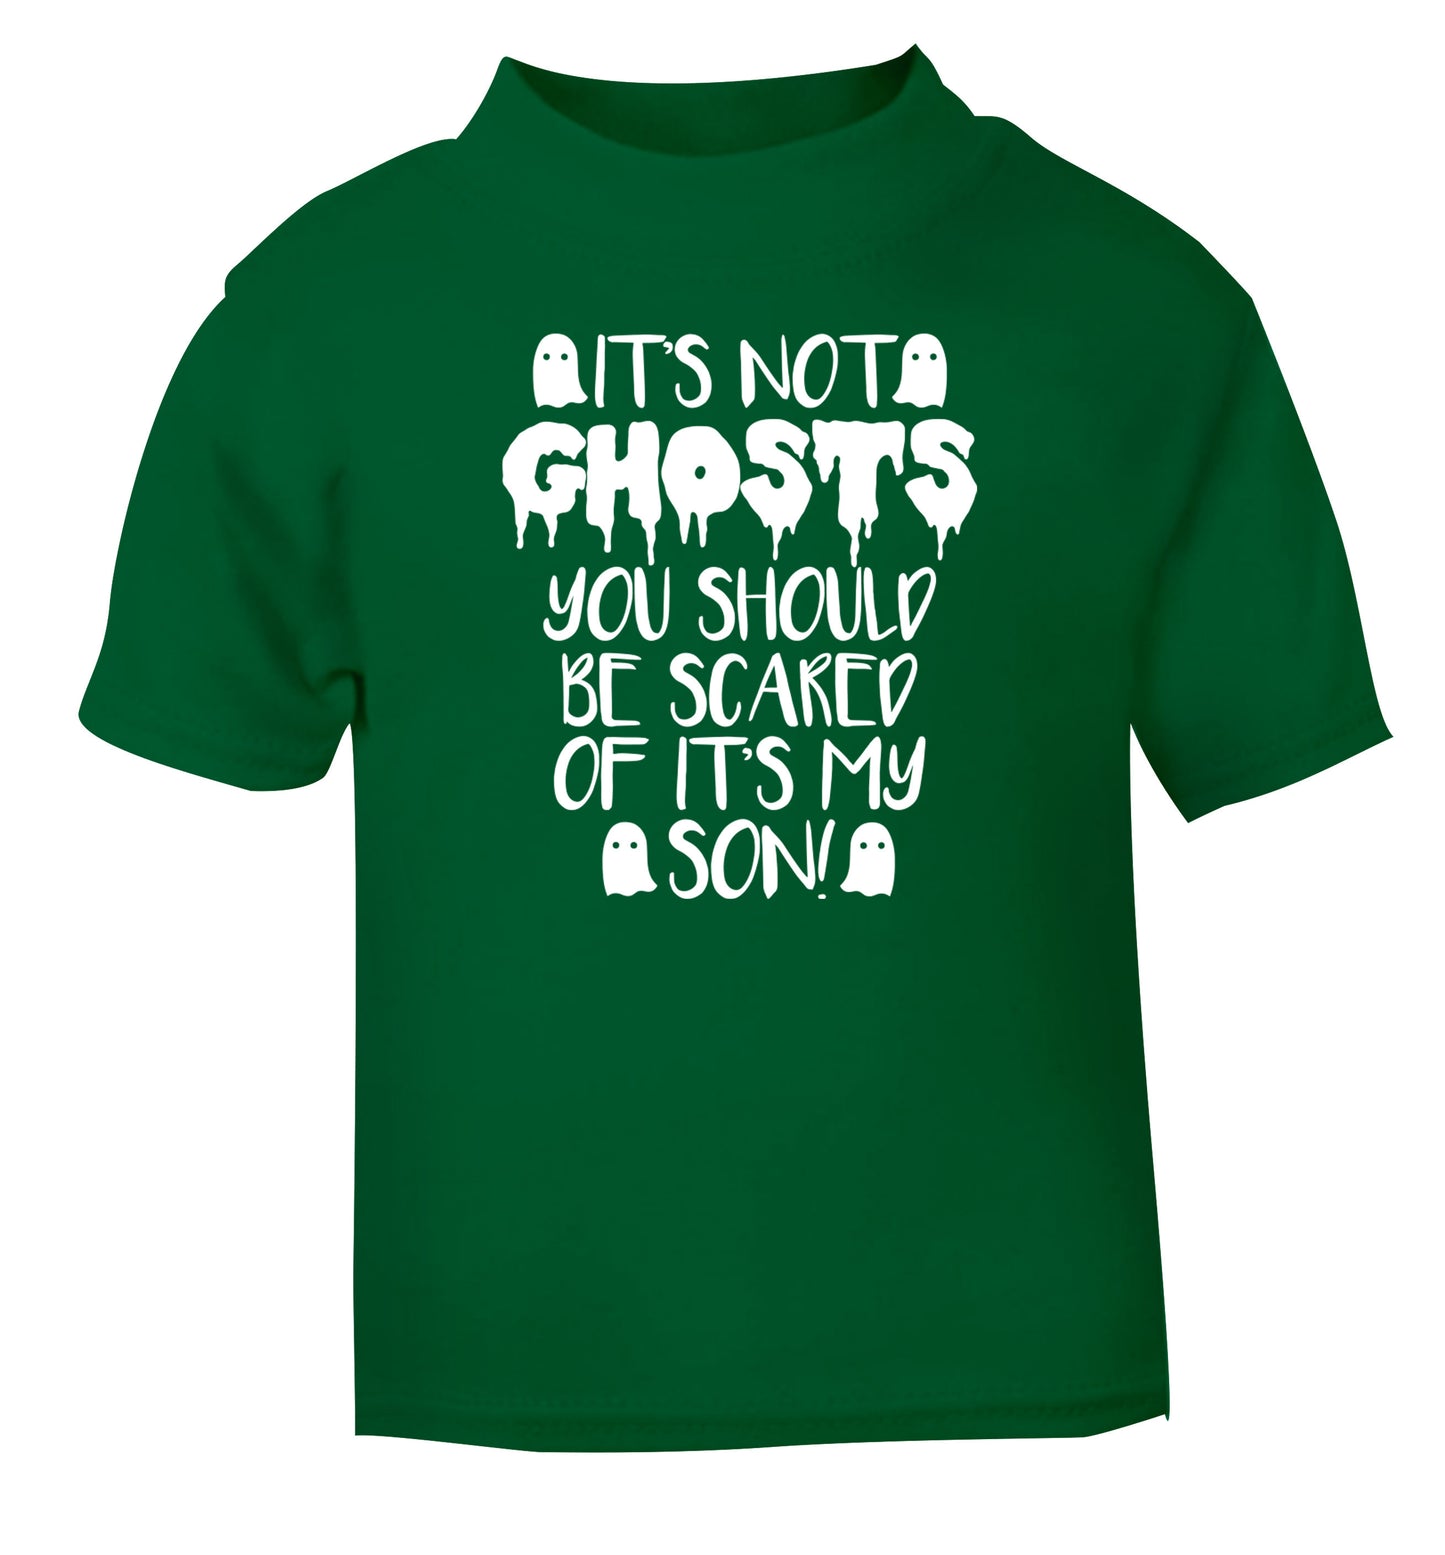 It's not ghosts you should be scared of it's my son! green Baby Toddler Tshirt 2 Years